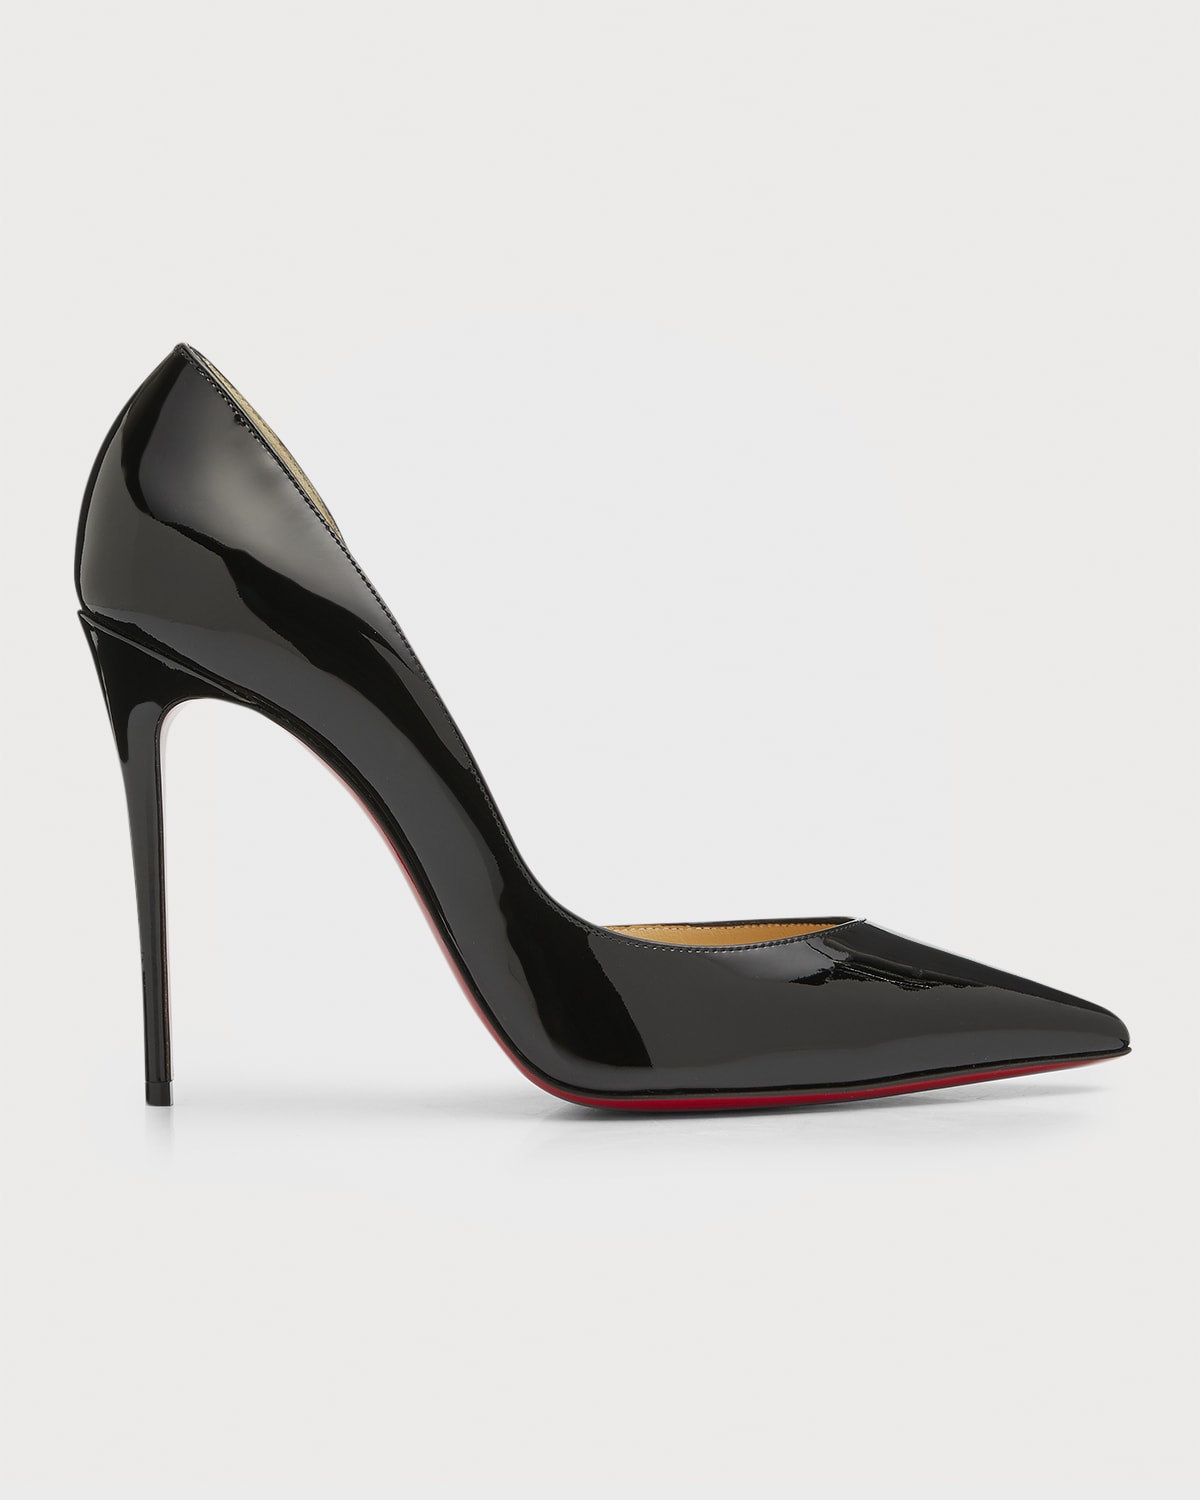 andrageren Blank lige ud Christian Louboutin Iriza Patent Open-Side Red Sole Pump | Neiman Marcus